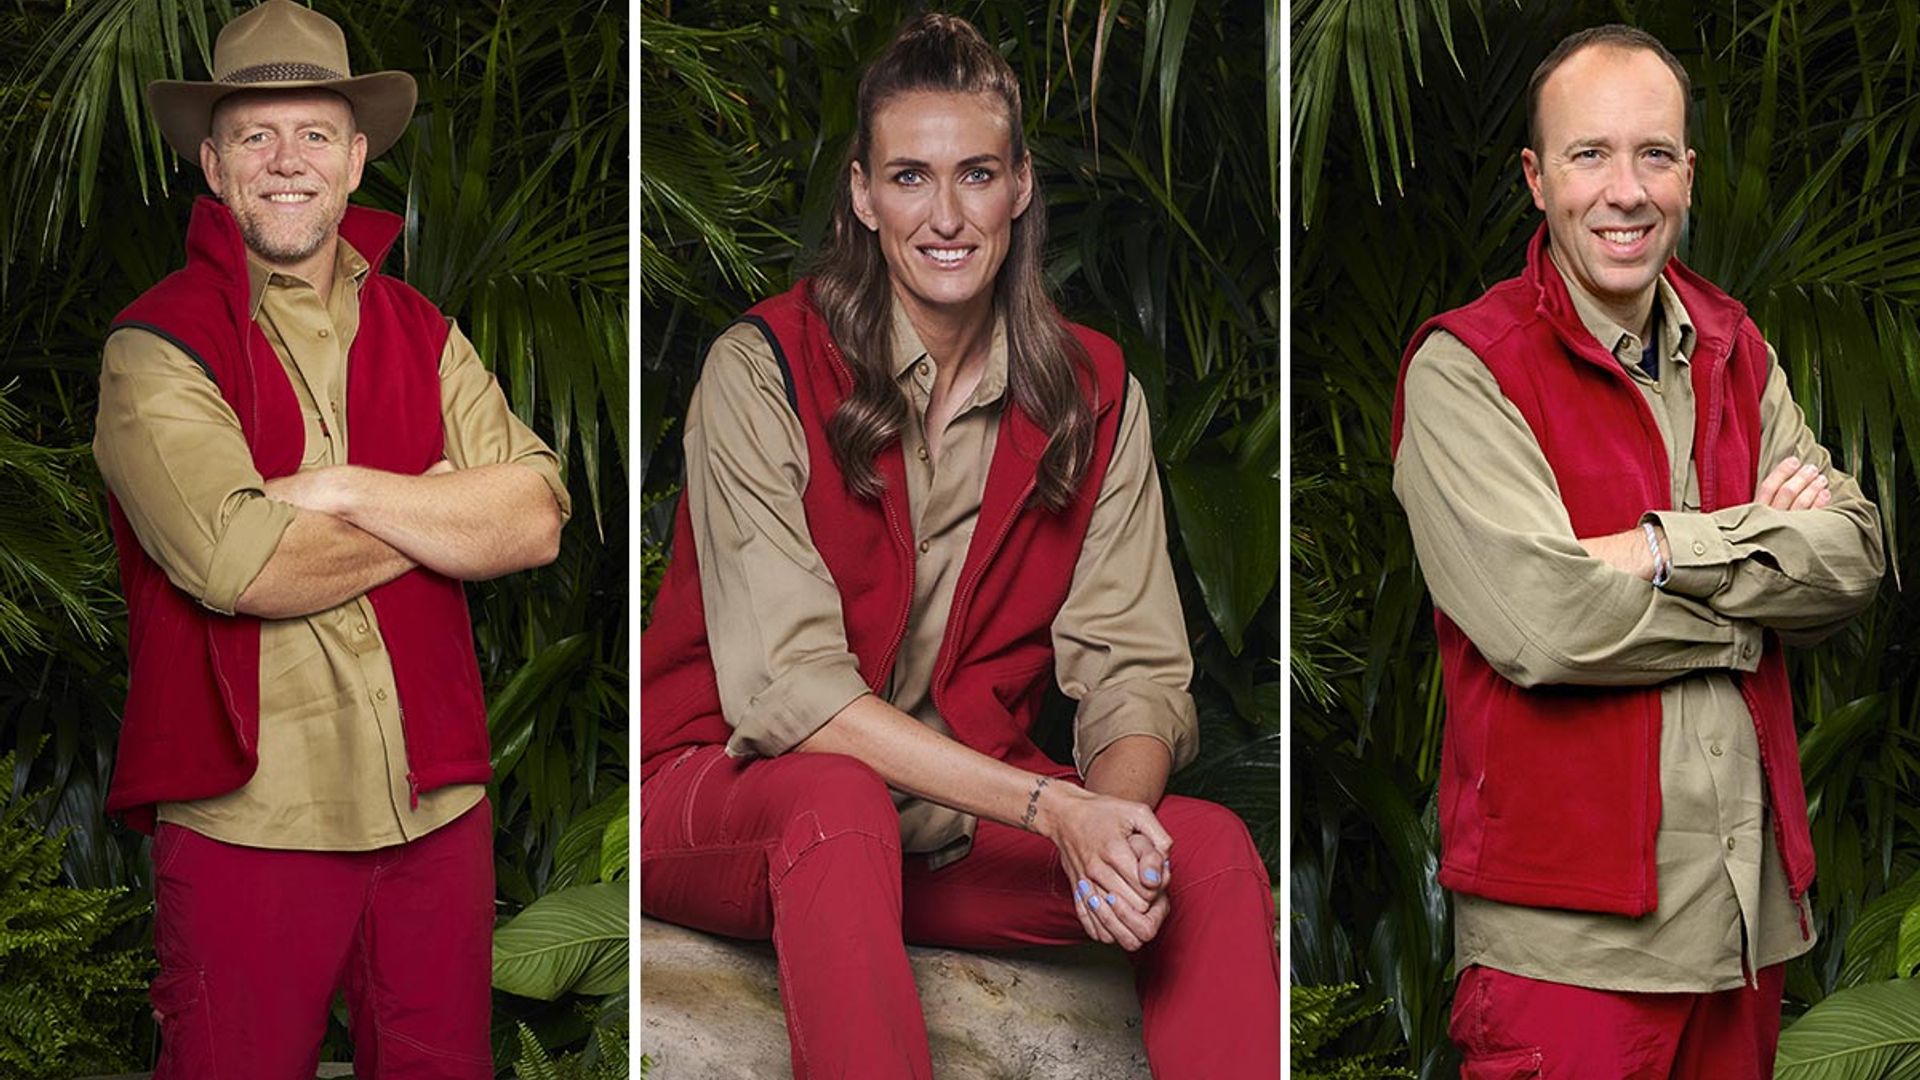 I’m a Celebrity: Who is the favourite to win? See what fans think